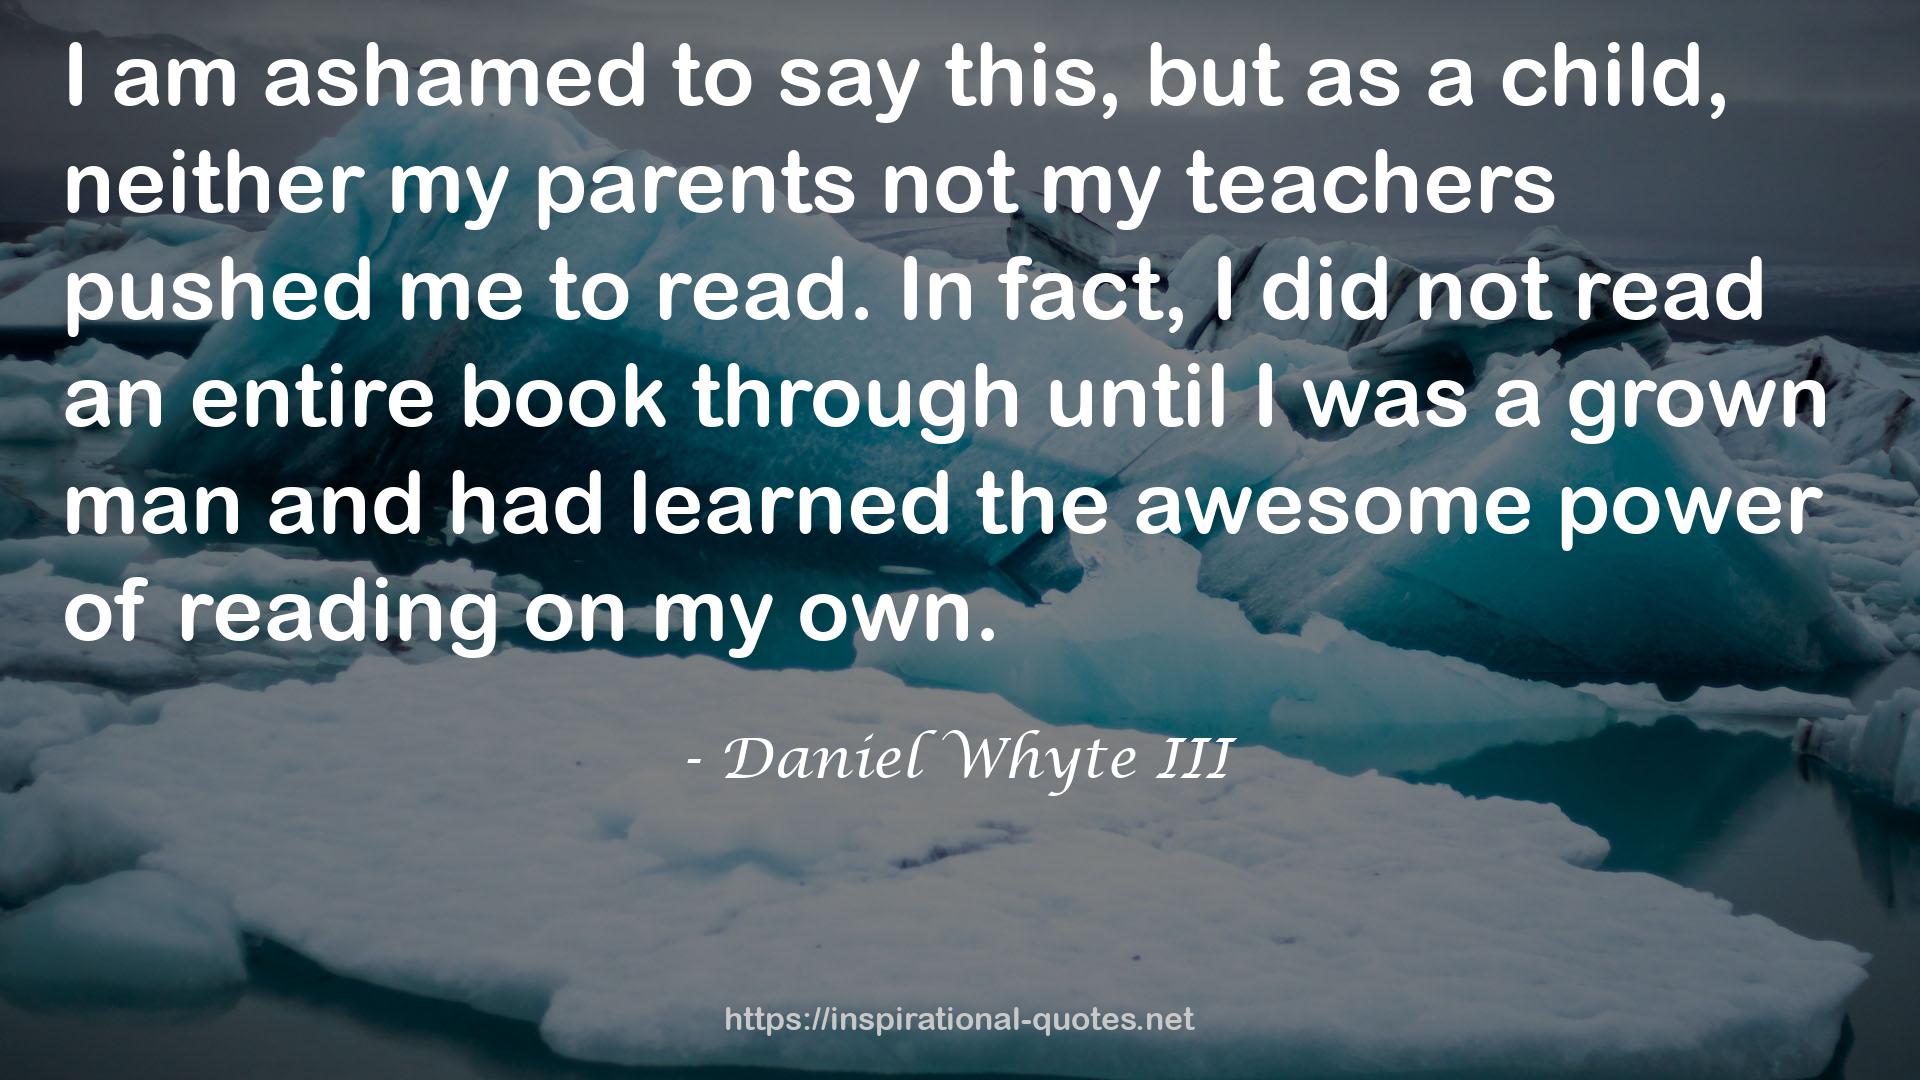 Daniel Whyte III QUOTES